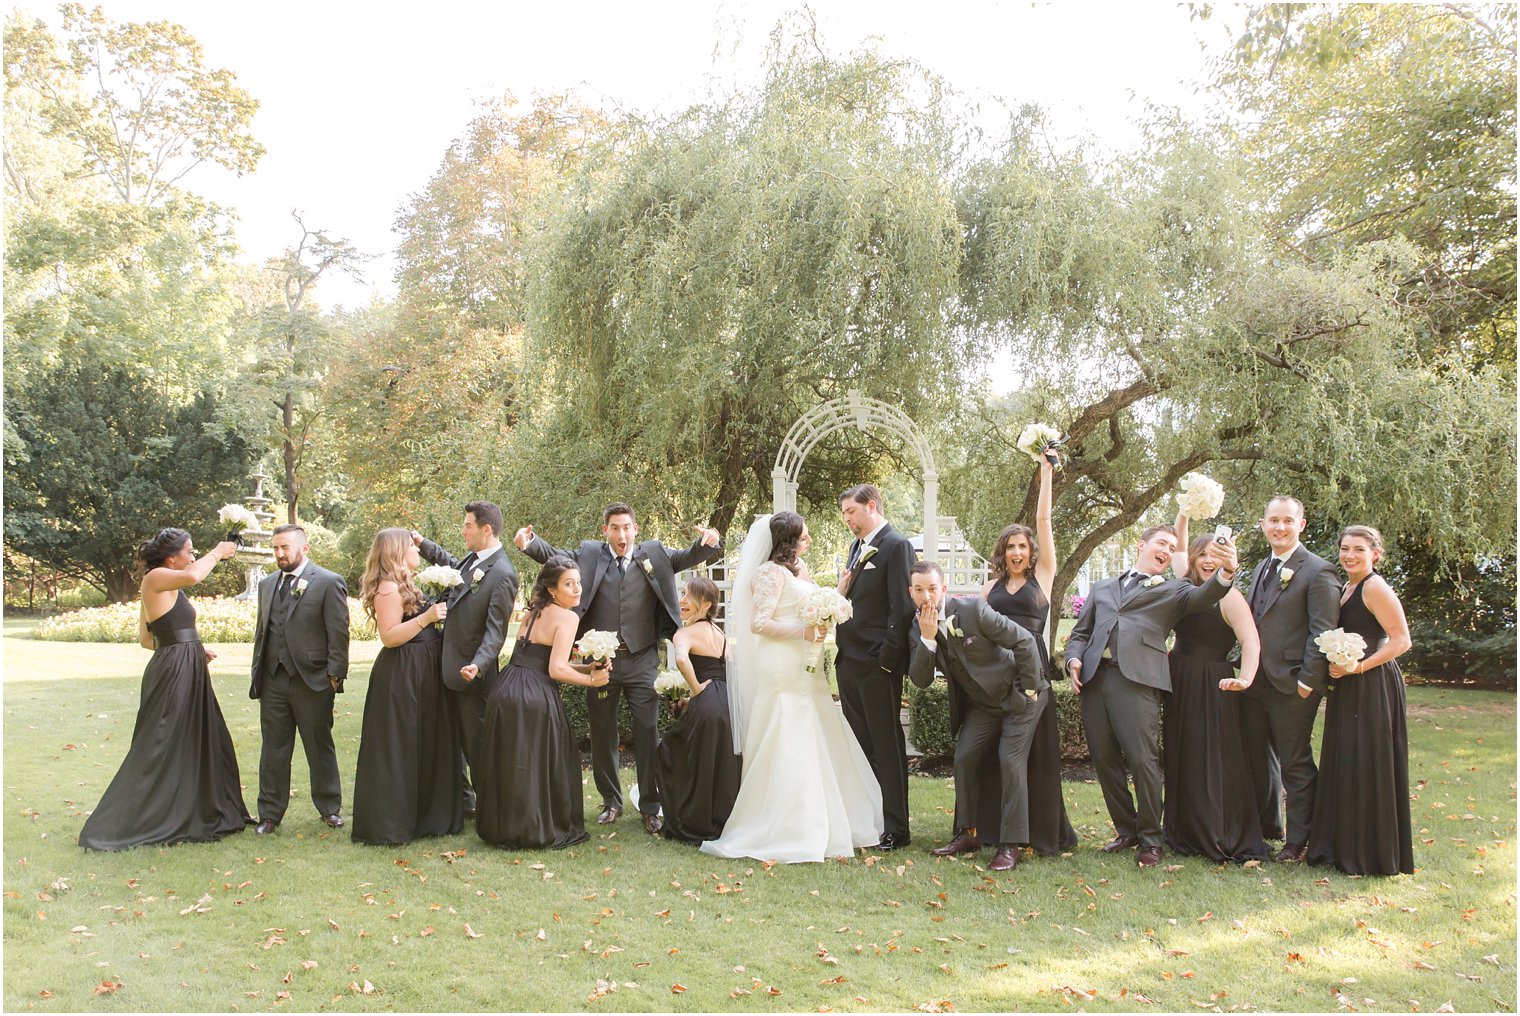 Bridal party in gray and black